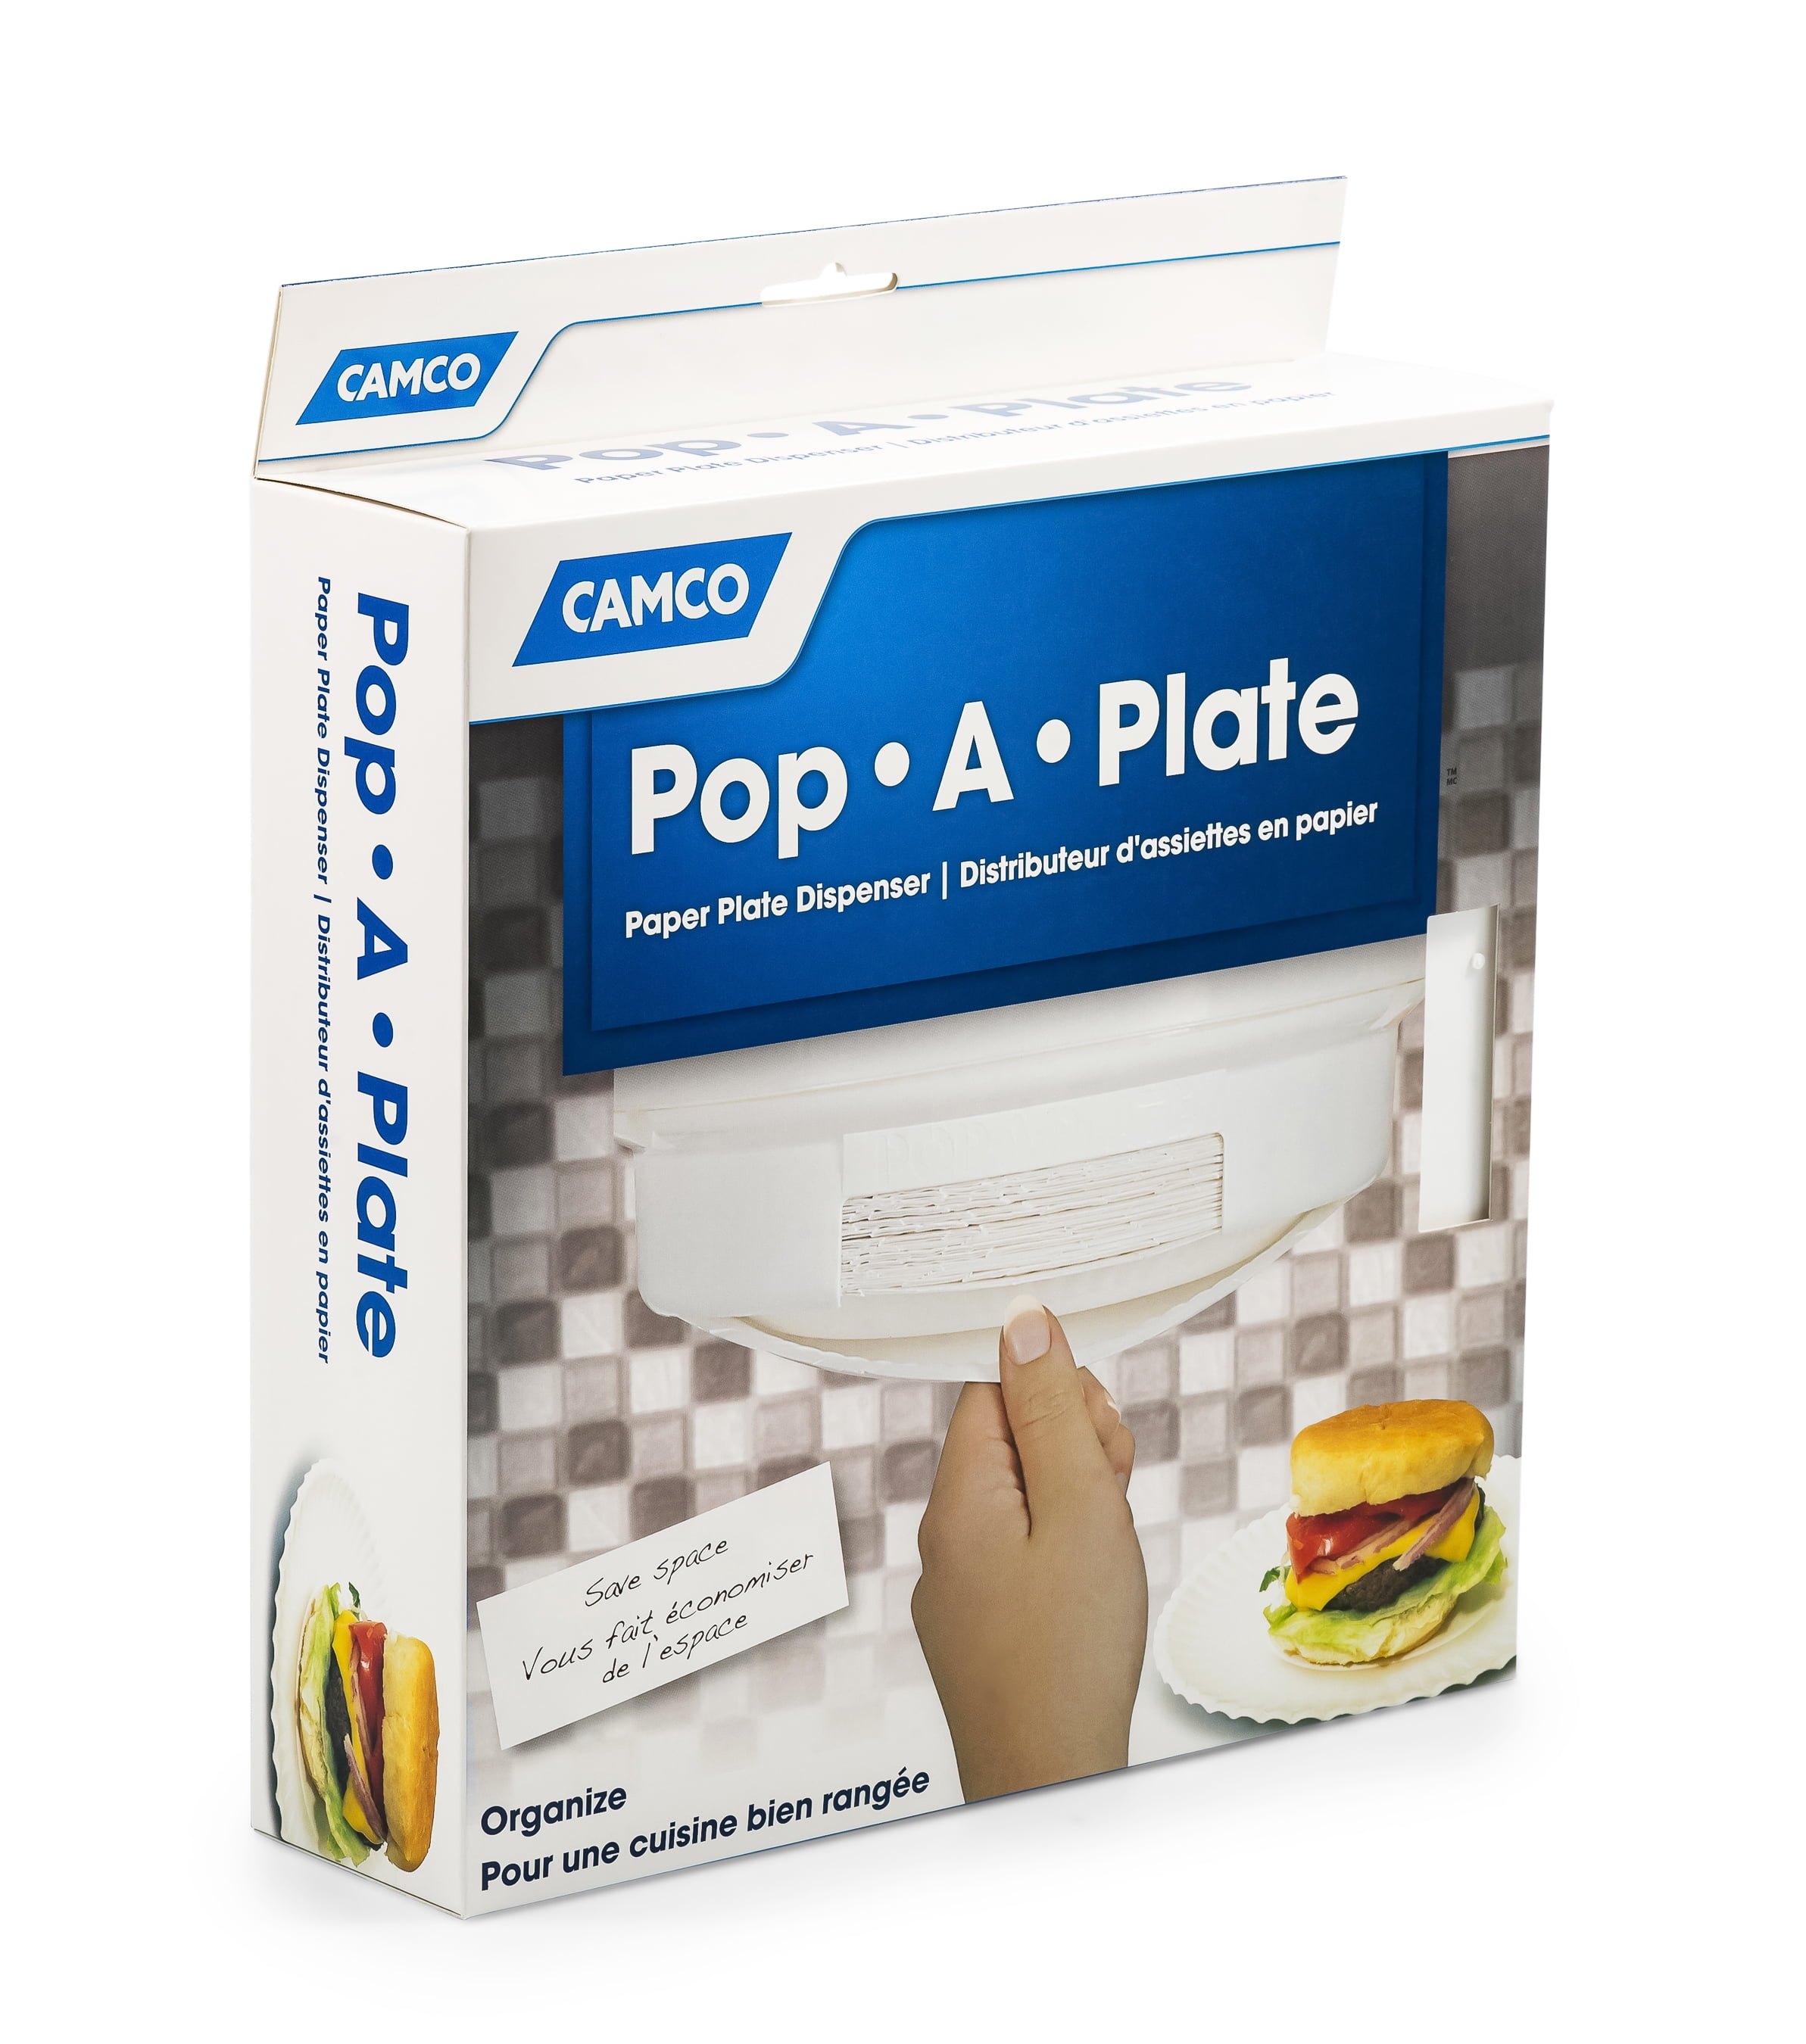 Camco Pop-a-Plate: $5 Tool To Organize Paper Plates Under Drawers – SheKnows